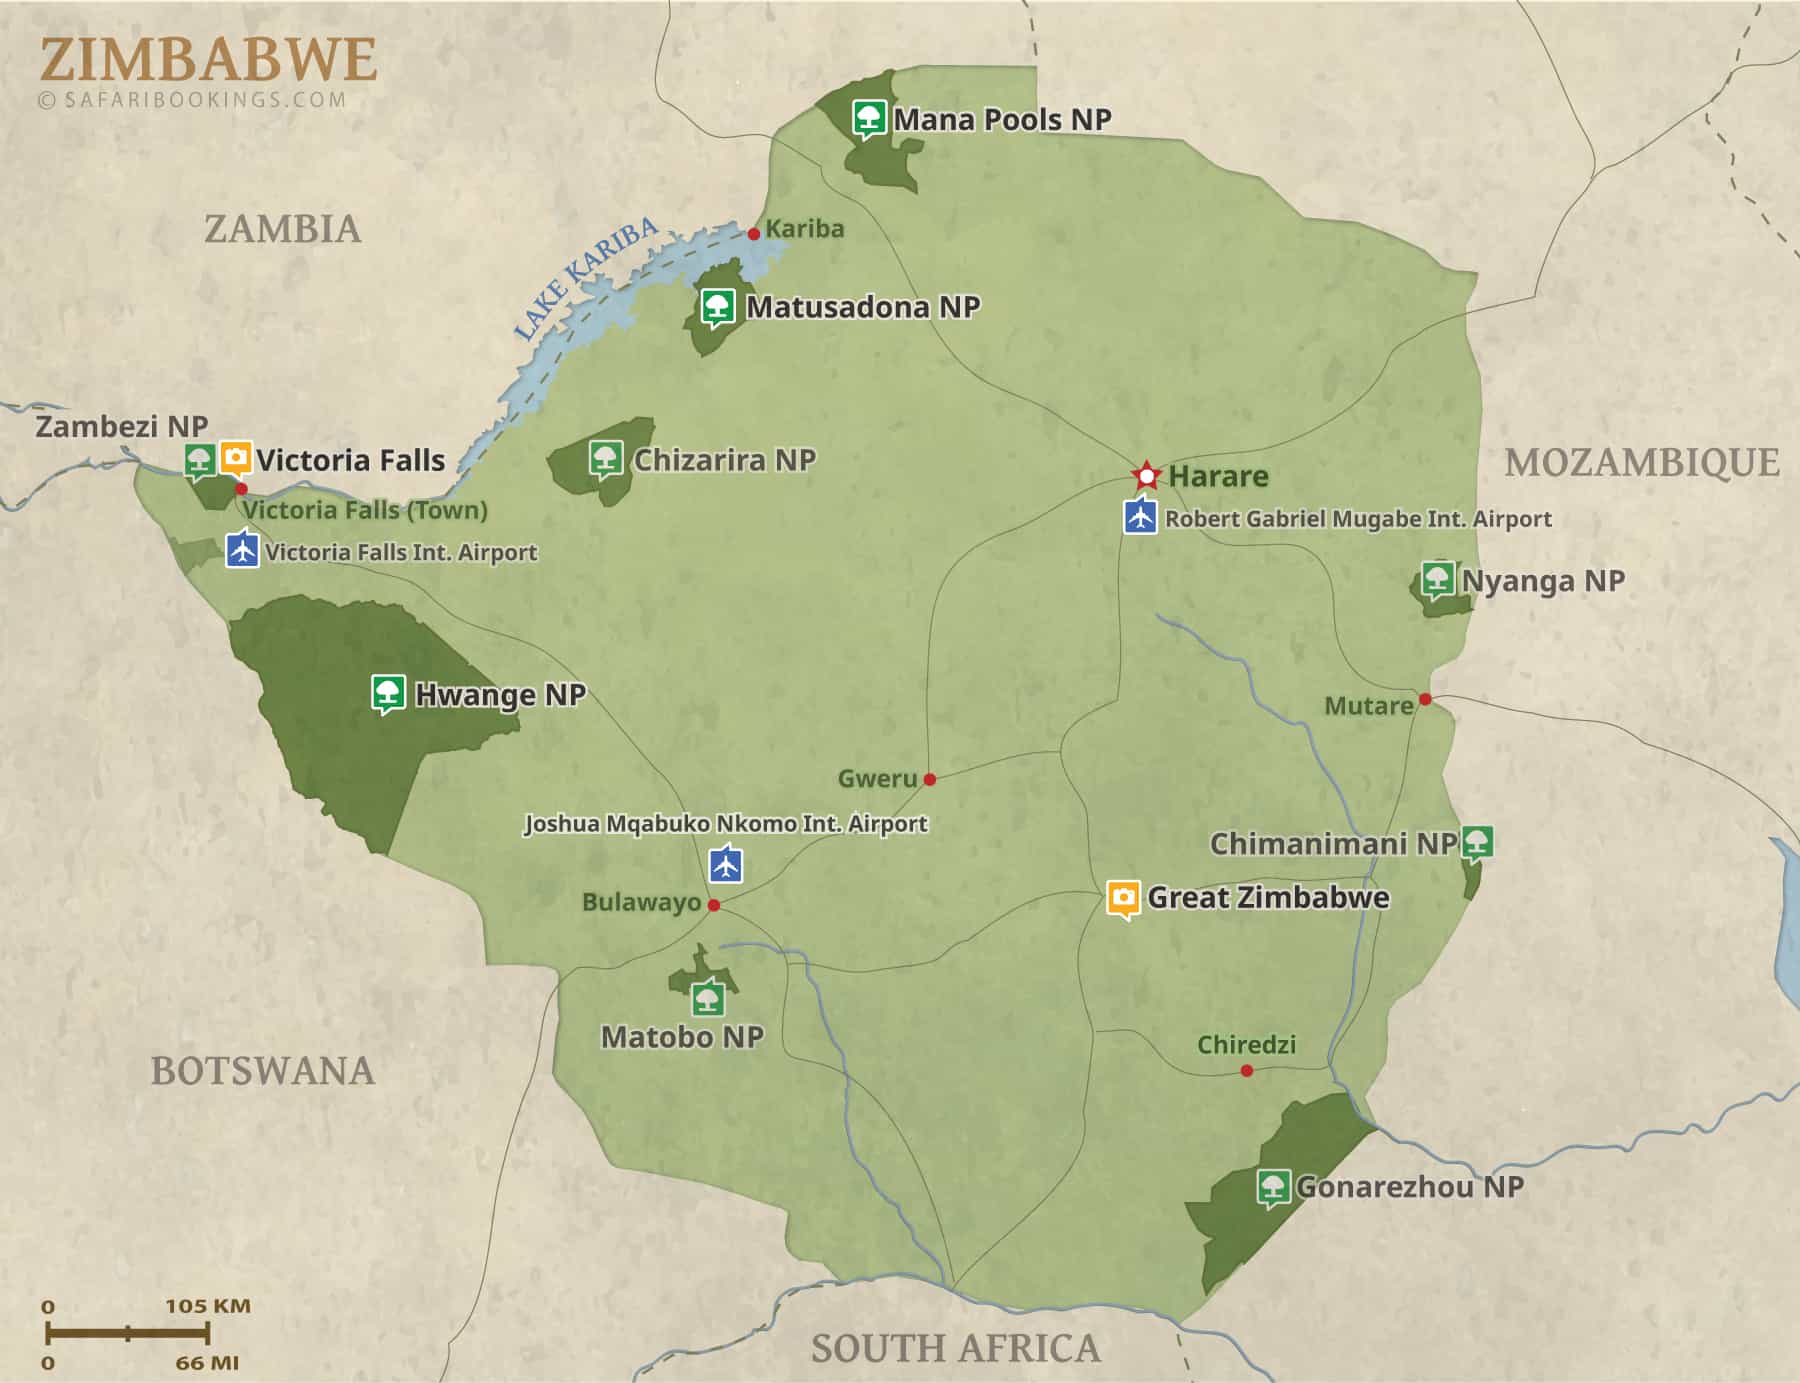 Popular Routes in Zimbabwe